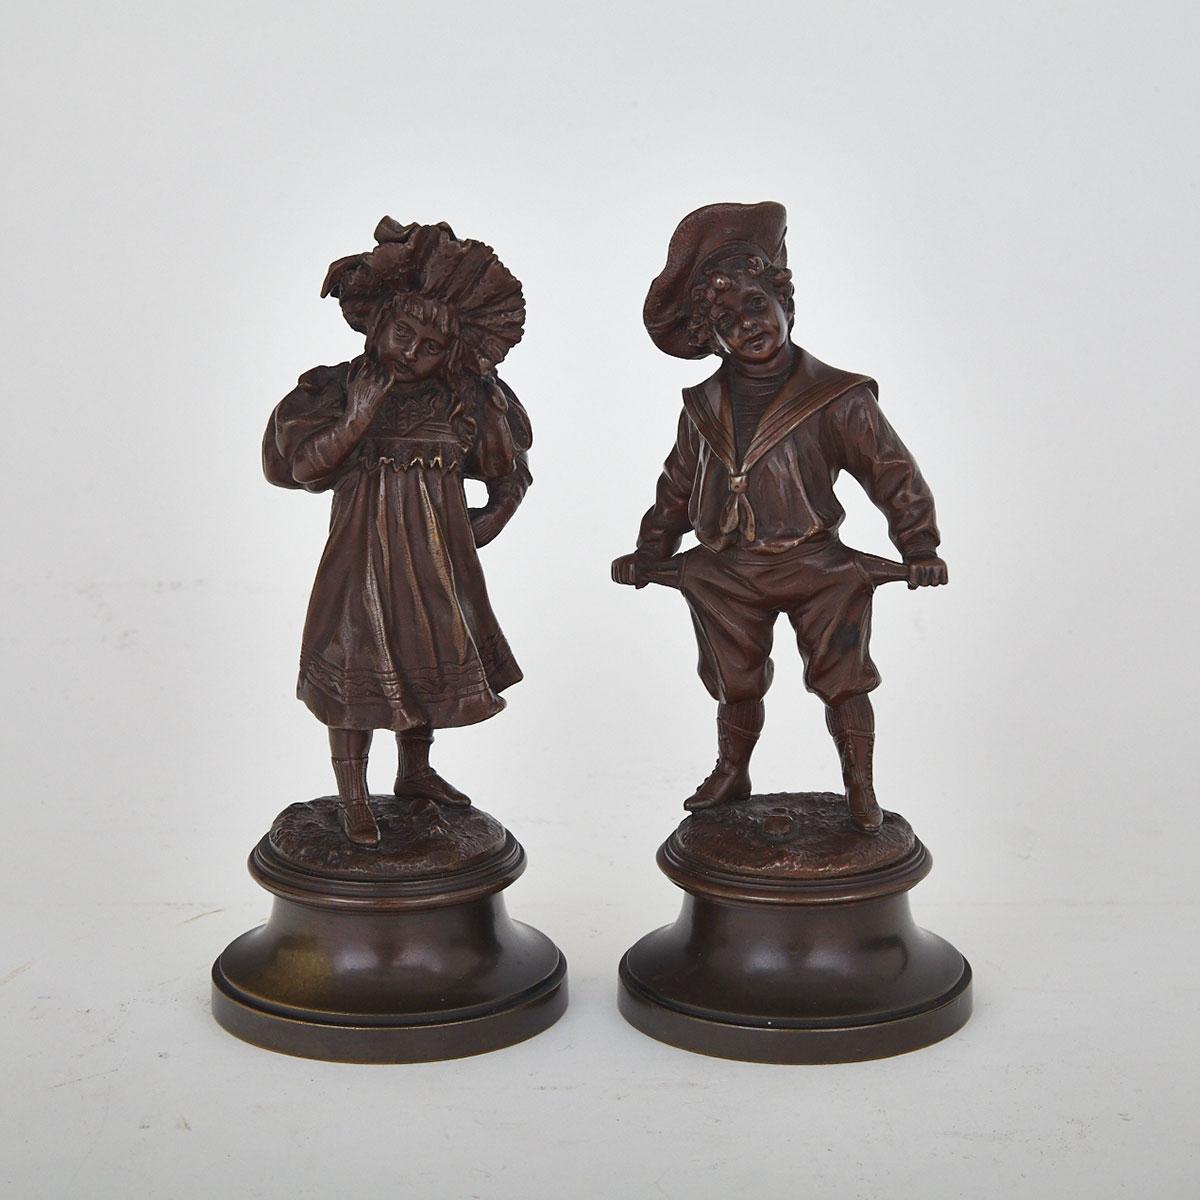 Pair of French Patinated Bronze Figures of Children, 19th century